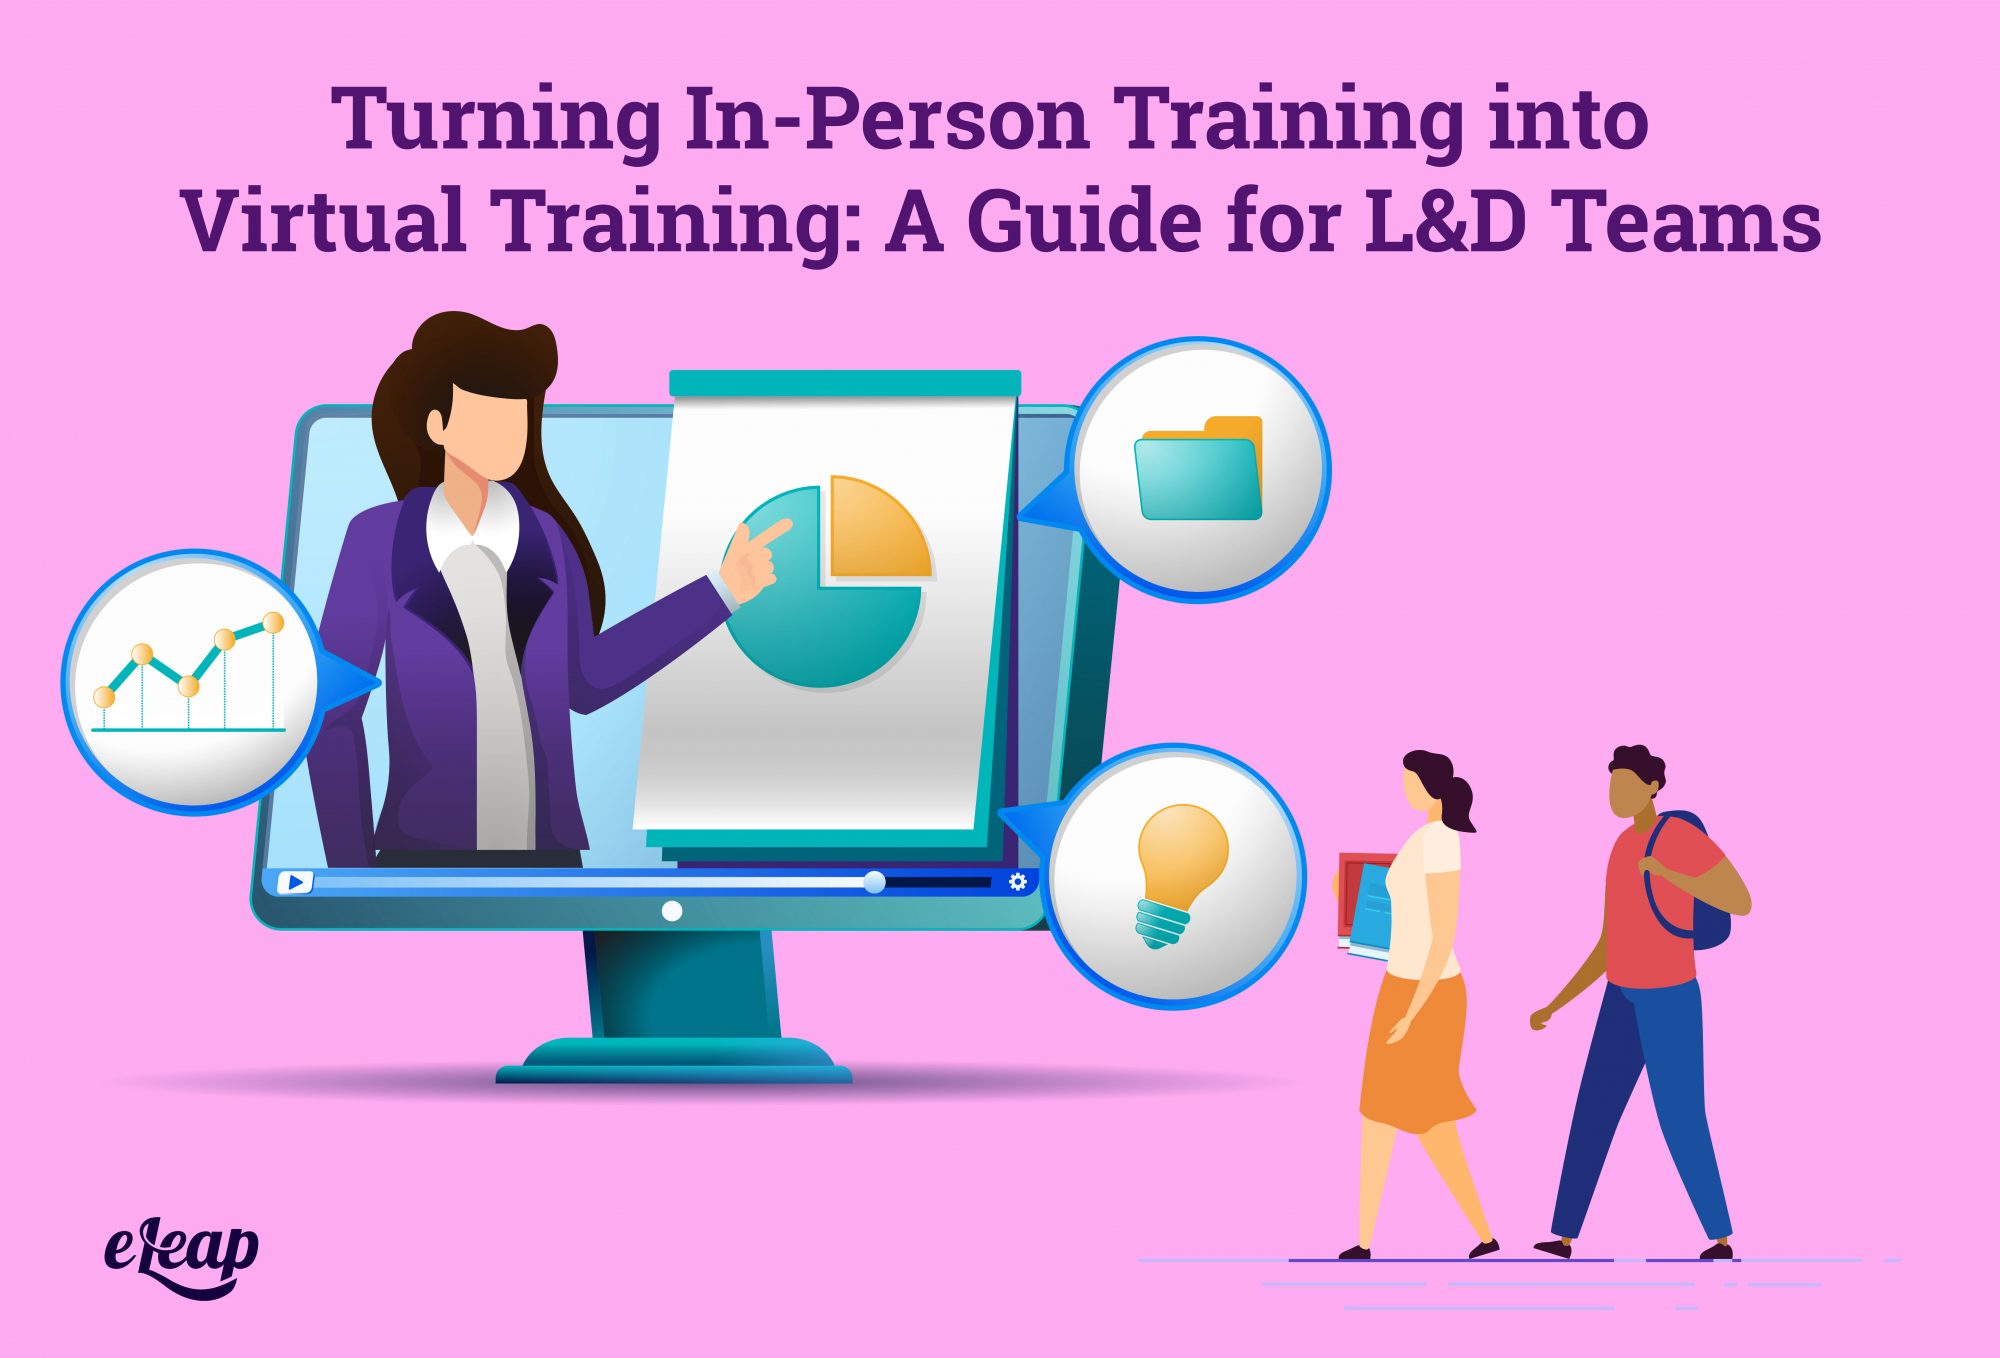 Turning In-Person Training into Virtual Training: A Guide for L&D Teams